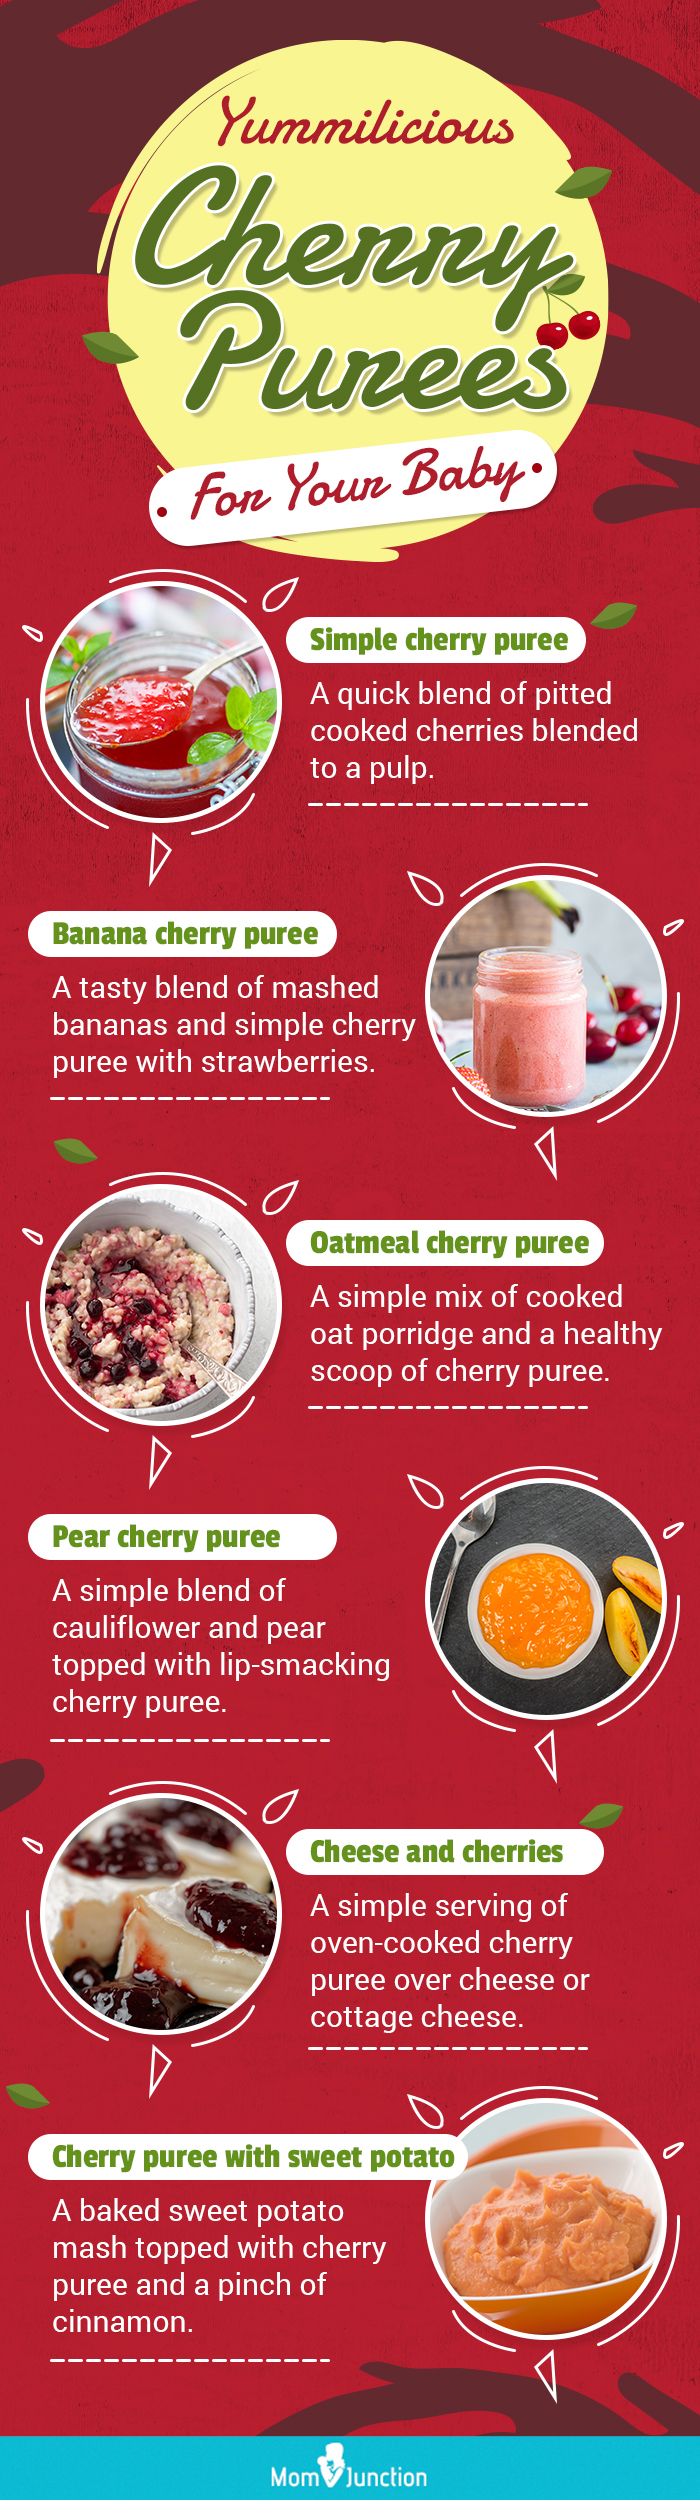 yummilicious cherry purees for your baby (infographic)